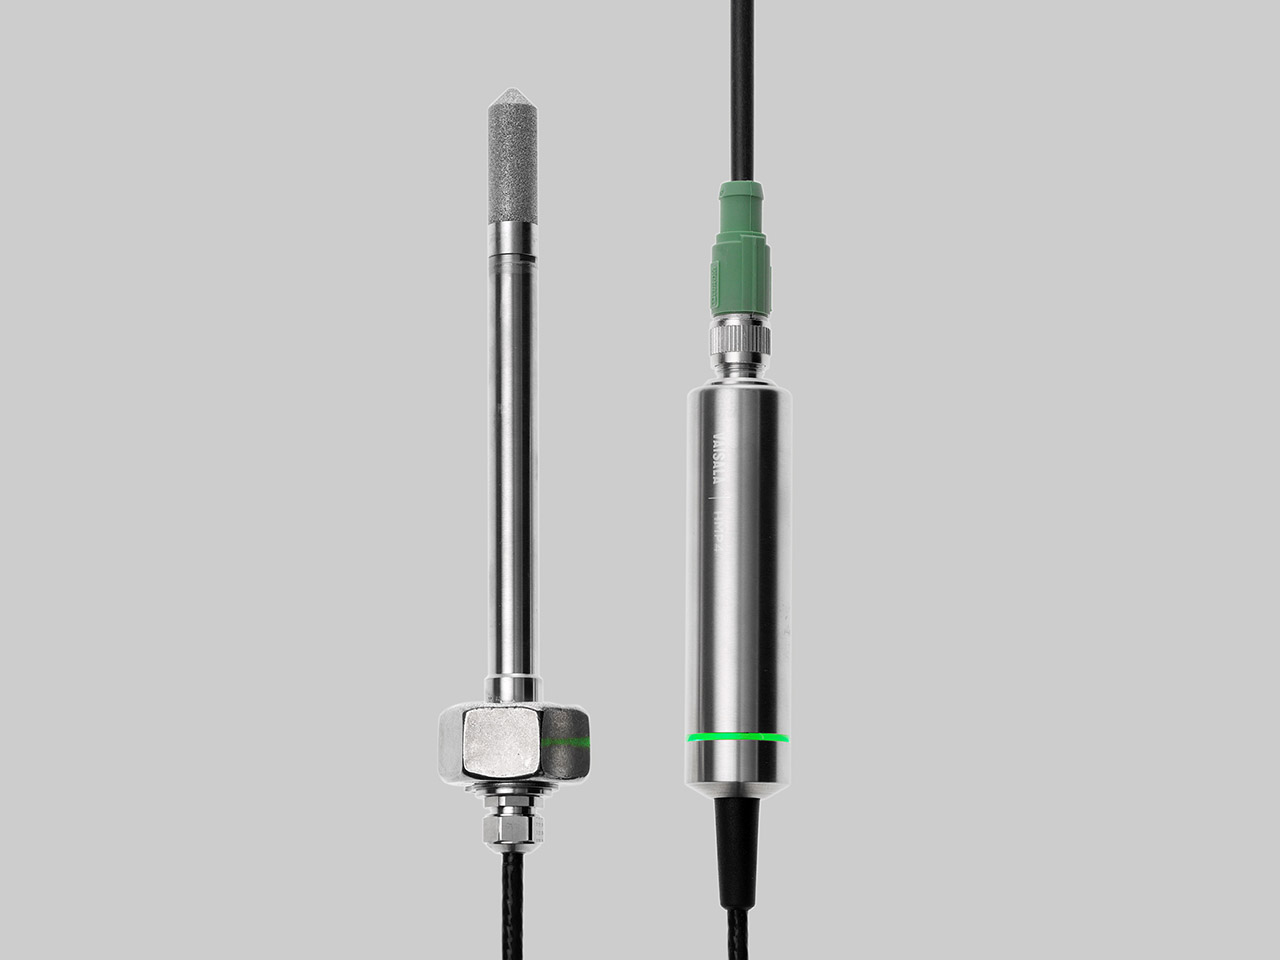 Vaisala HUMICAP ® Humidity and Temperature Probe HMP4 is designed for high - pressure applications